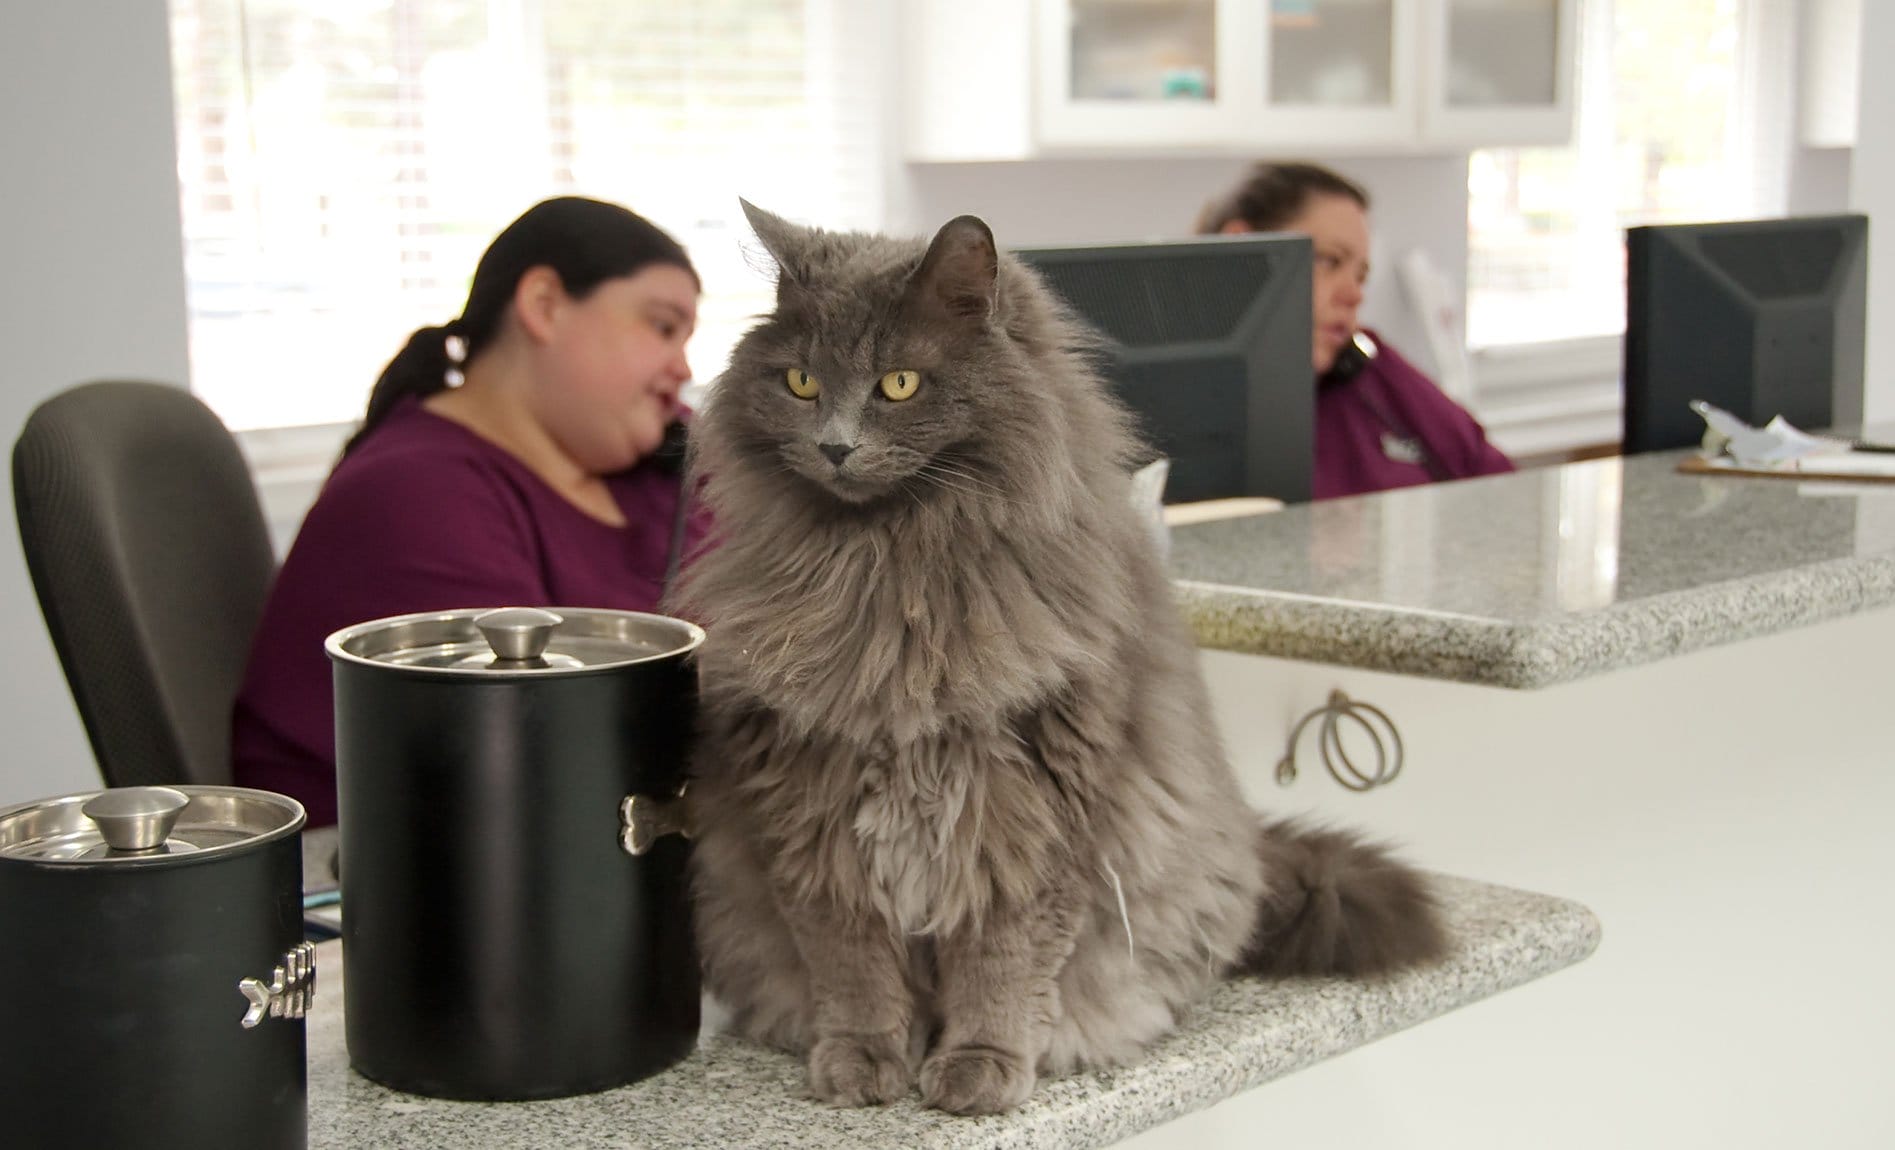 veterinary receptionists on phone with cat on counter